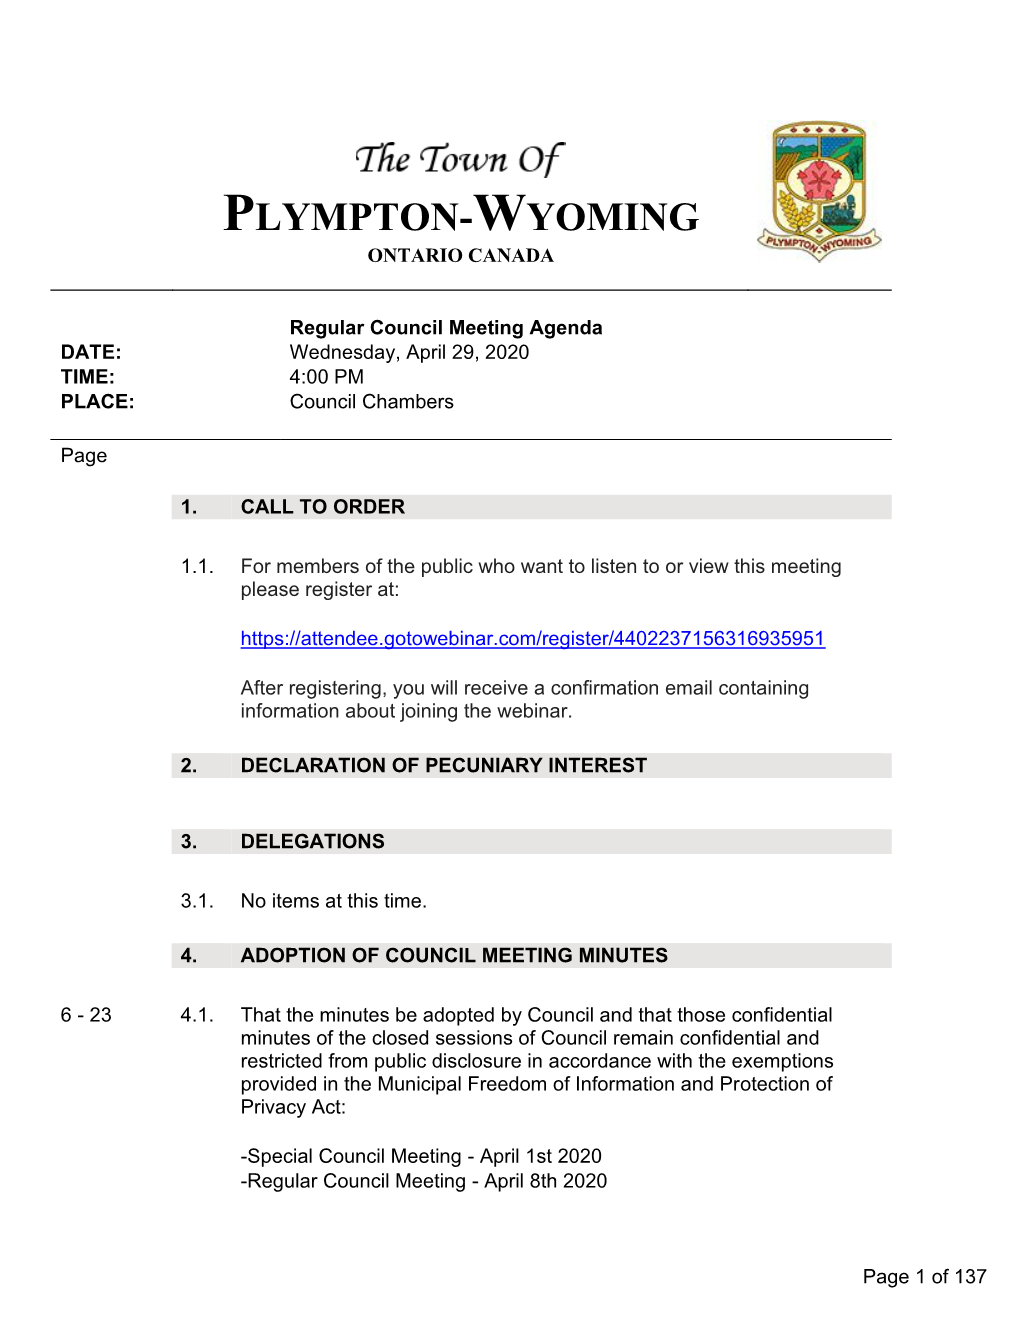 Regular Council Meeting Agenda DATE: Wednesday, April 29, 2020 TIME: 4:00 PM PLACE: Council Chambers